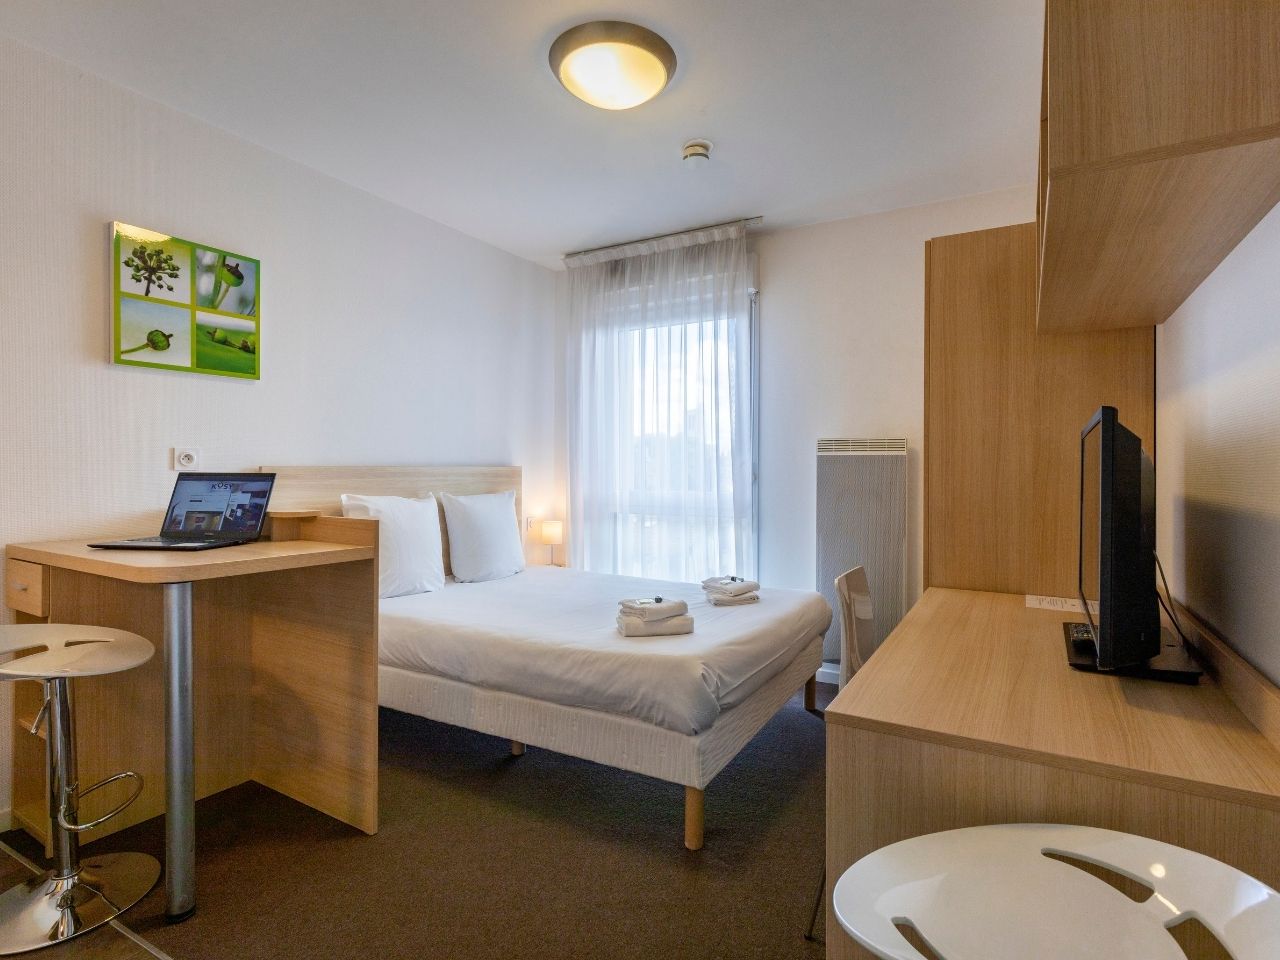 Kosy Appart Hotêl - Troyes City & Park ★★ - chambre-city-and-park-troyes (2)